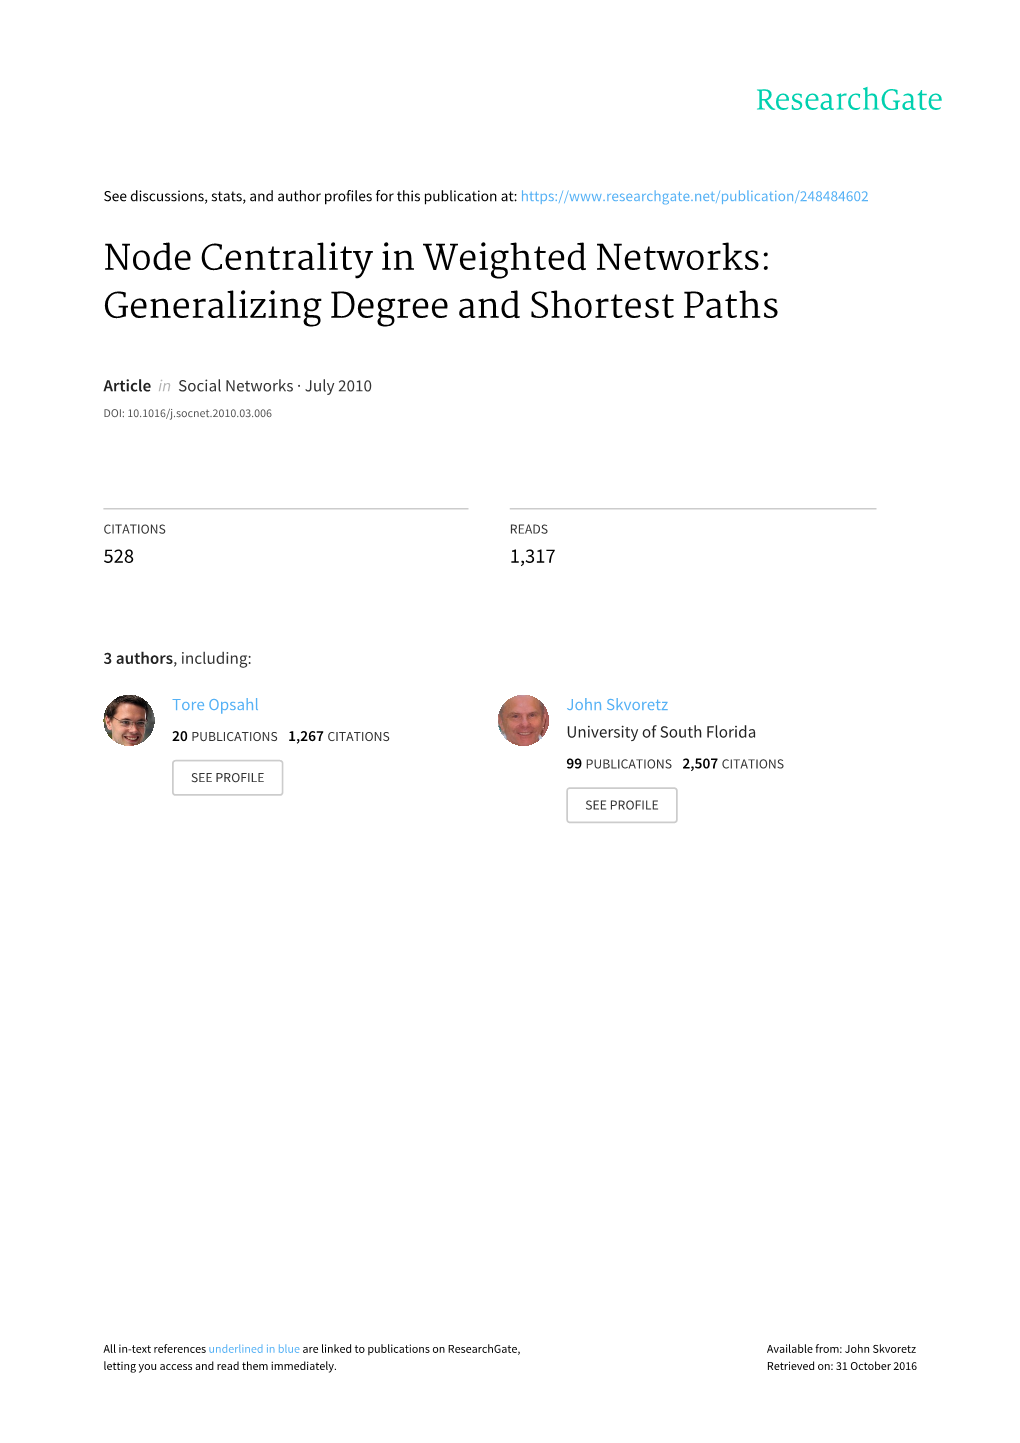 Node Centrality in Weighted Networks: Generalizing Degree and Shortest Paths